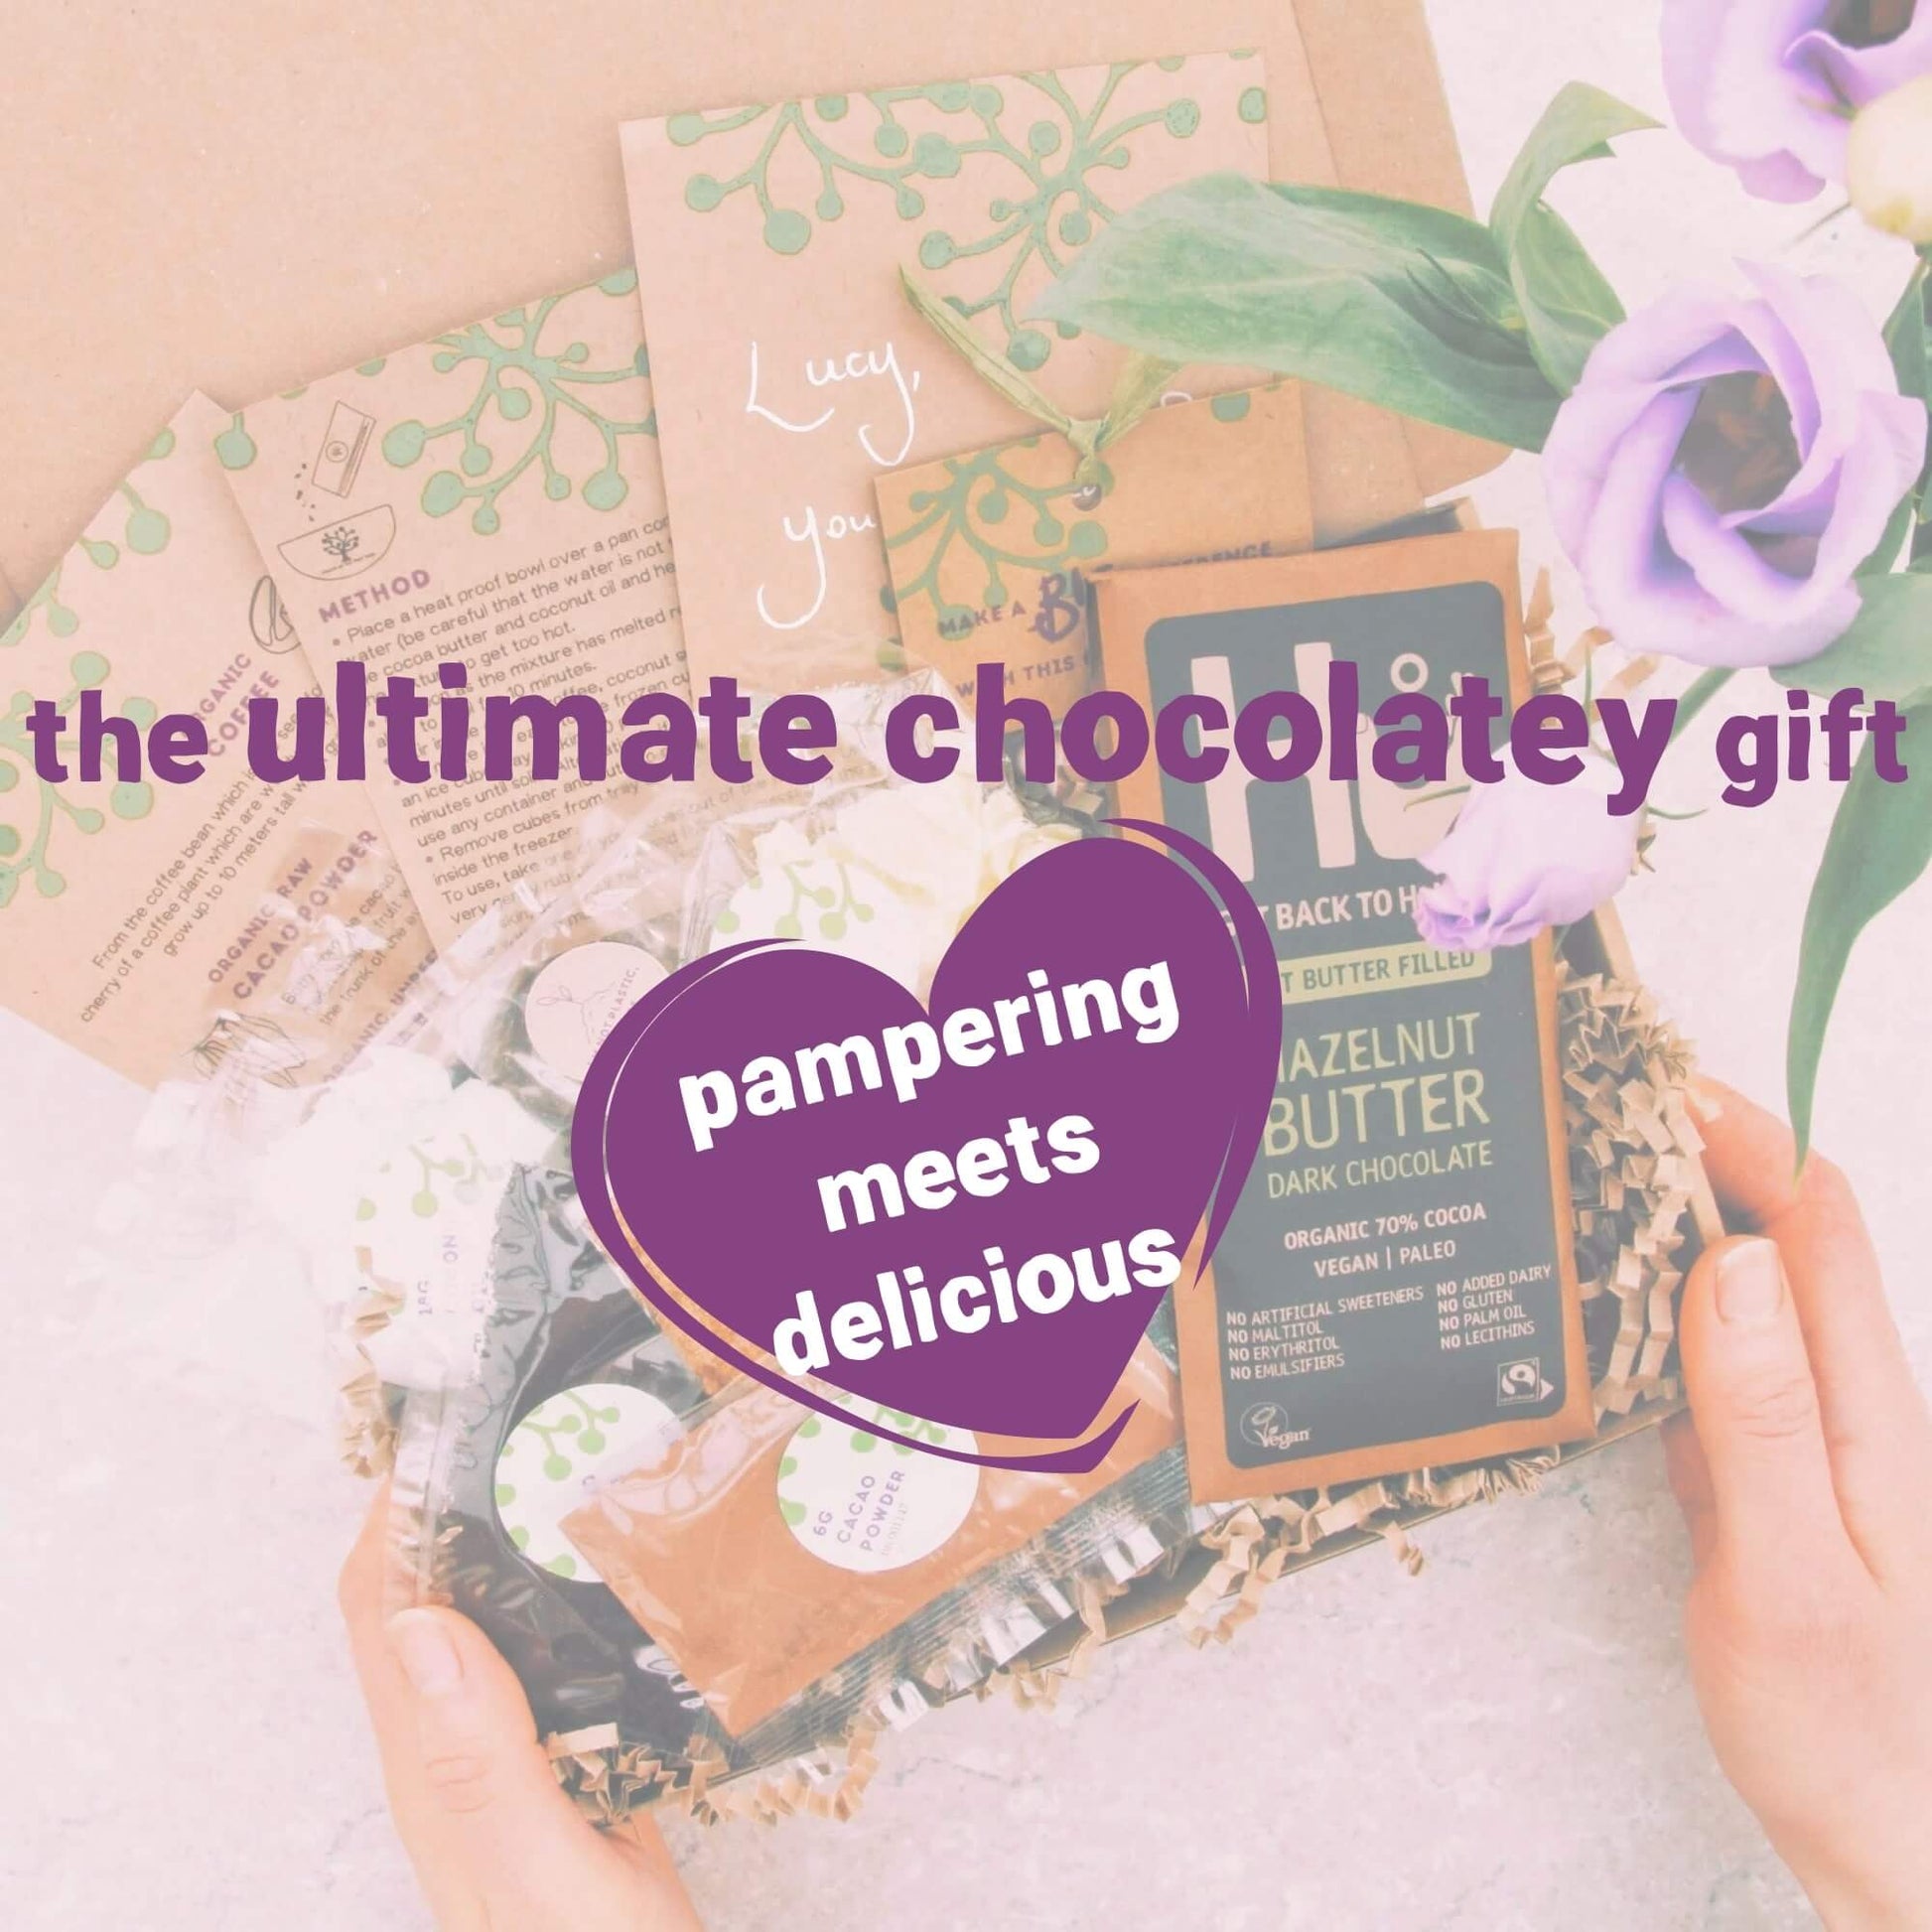 pamper kit and chocolate inside sister gift box